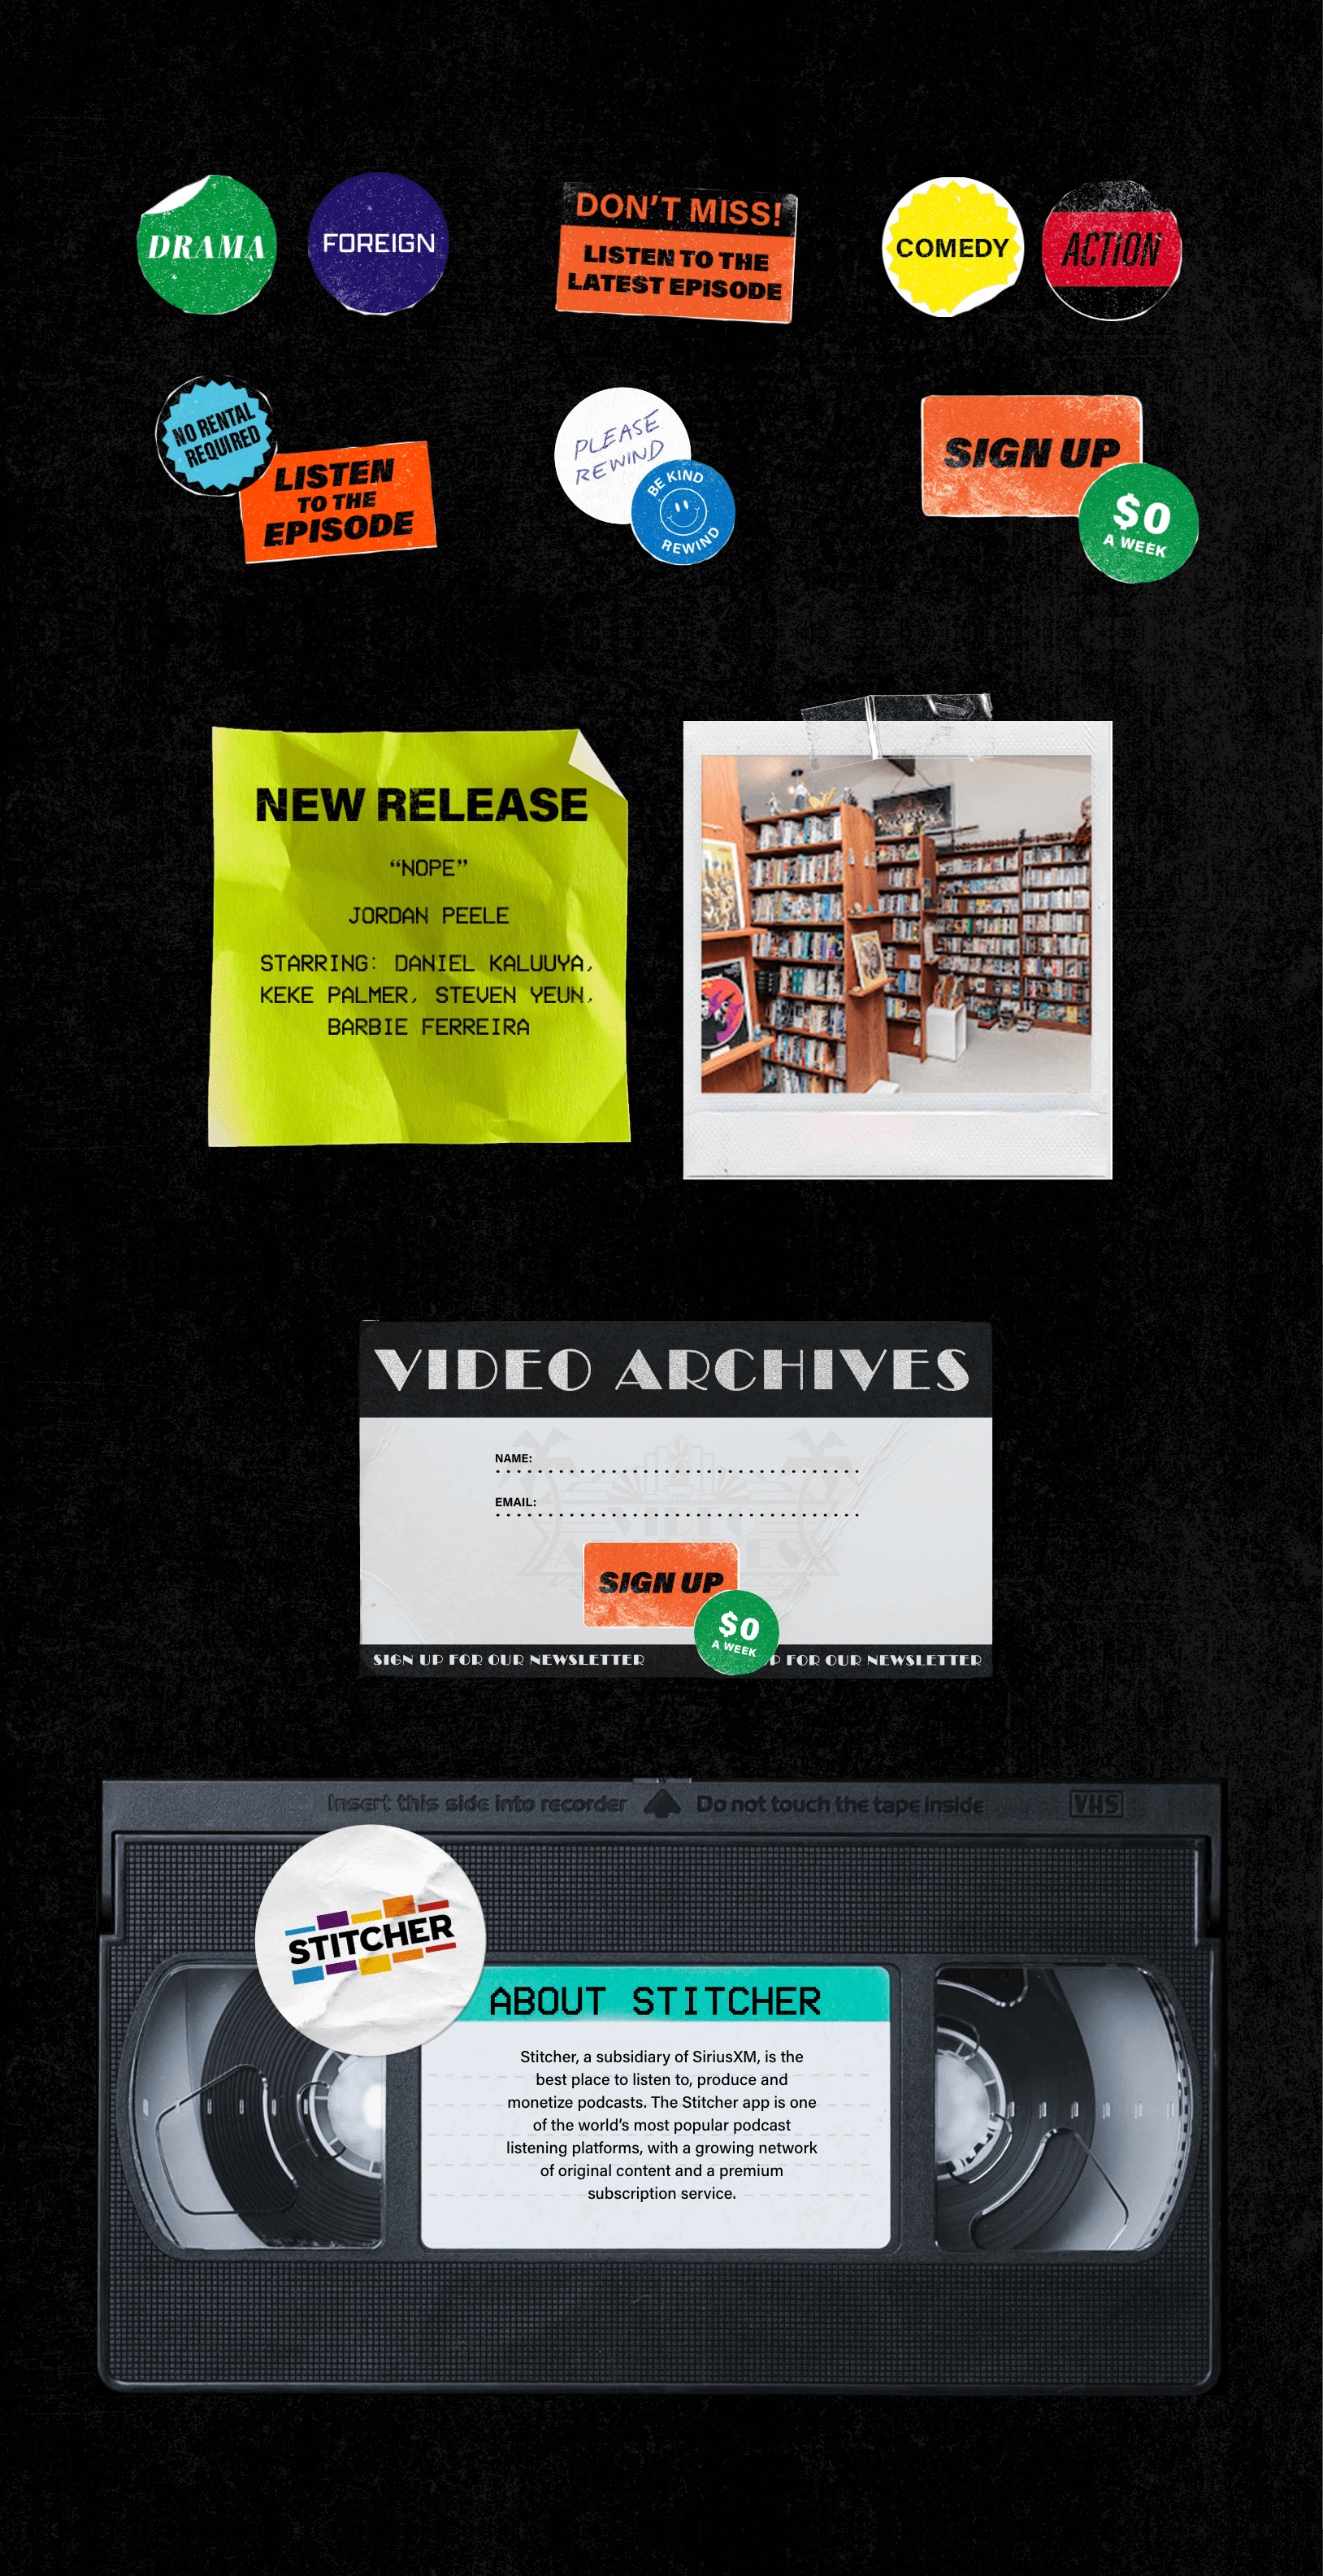 elements of the Video archives site, including stickers, post its, polaroids, membership card, and VHS tape